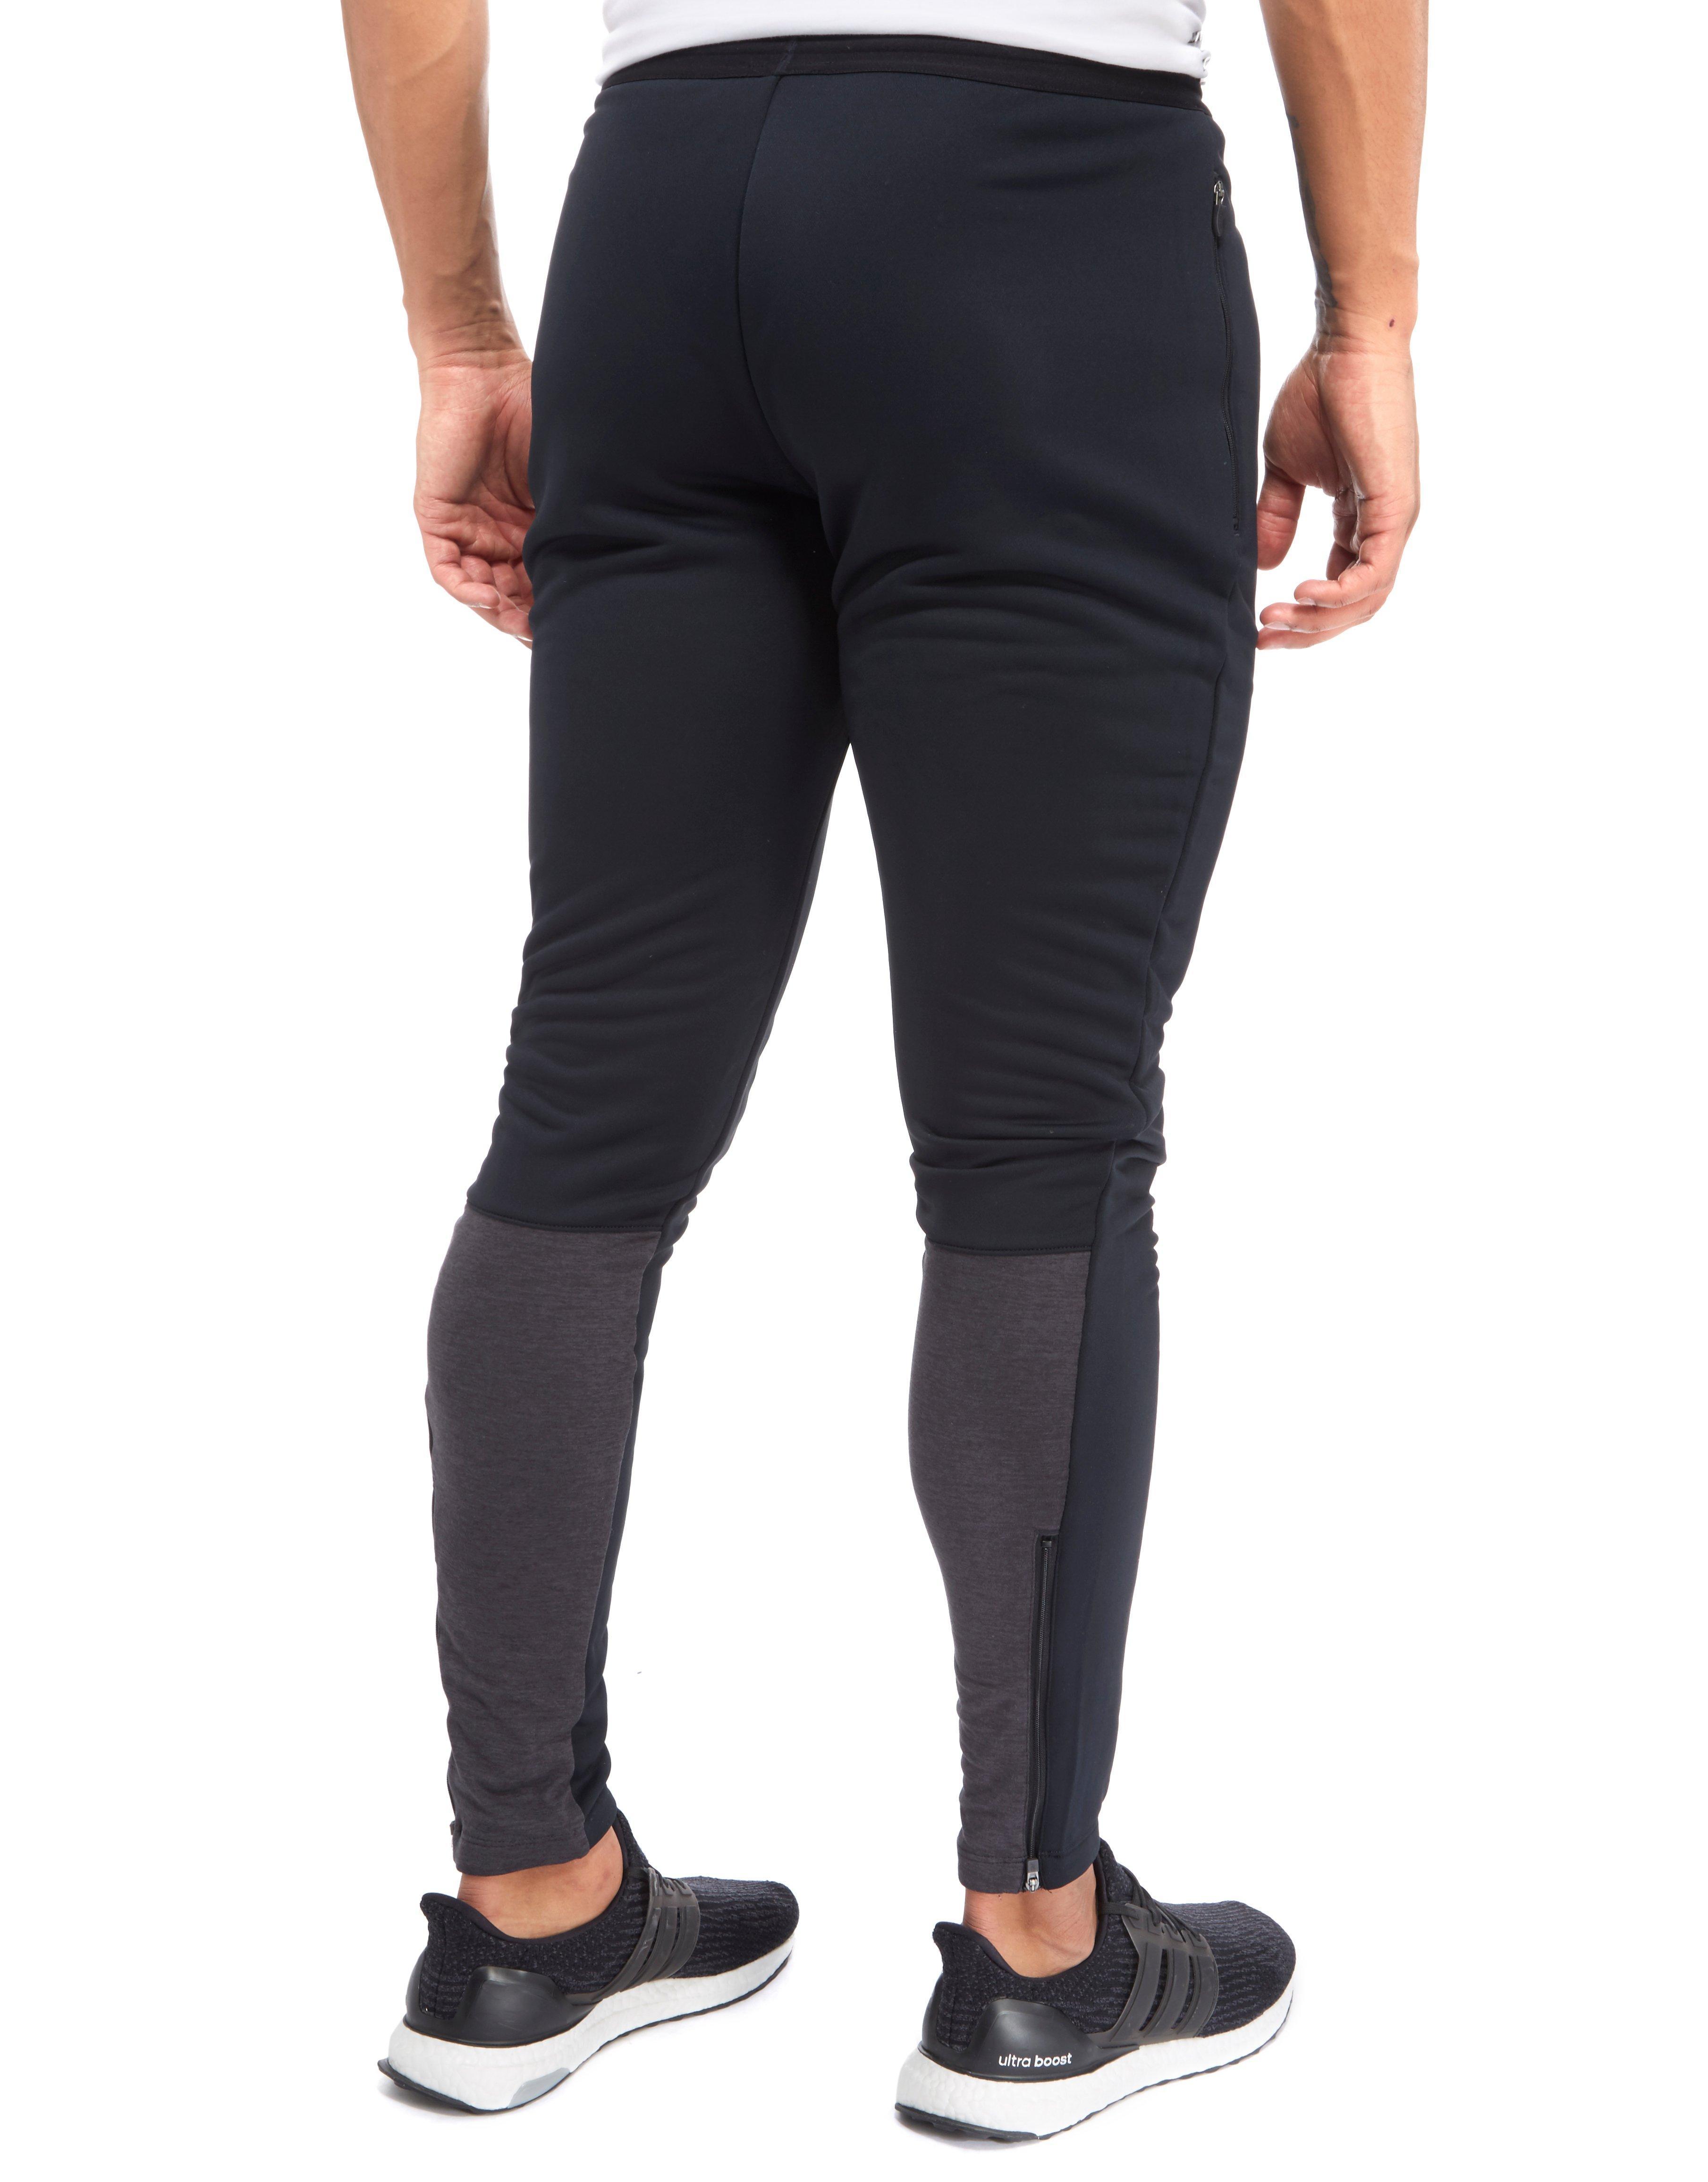 15 Minute New balance workout pants for Women